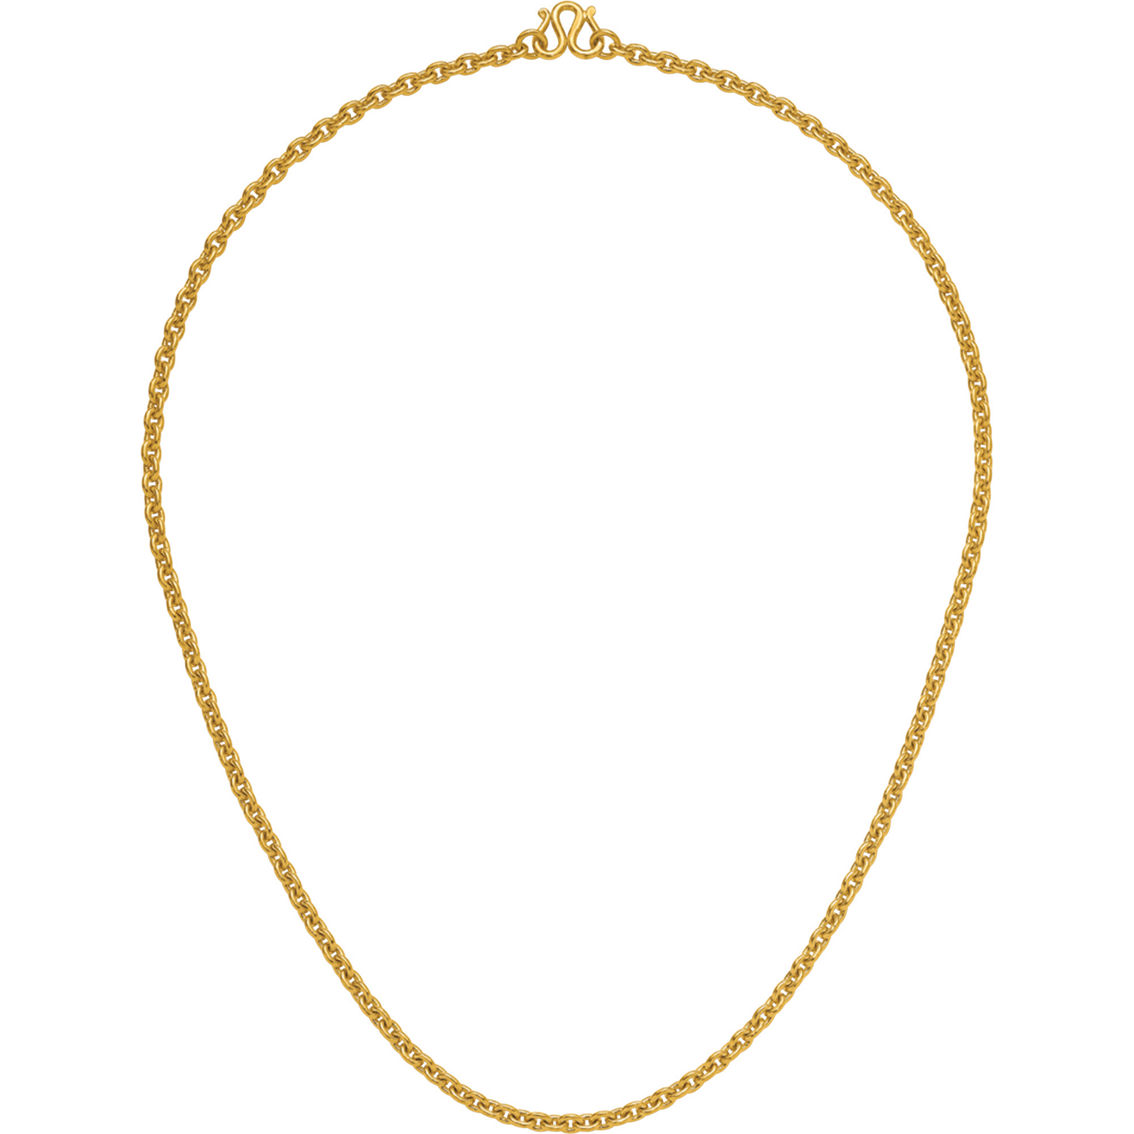 24K Pure Gold 24K Yellow Gold 5.4mm Solid Open Oval Link 20 in. Chain - Image 2 of 5